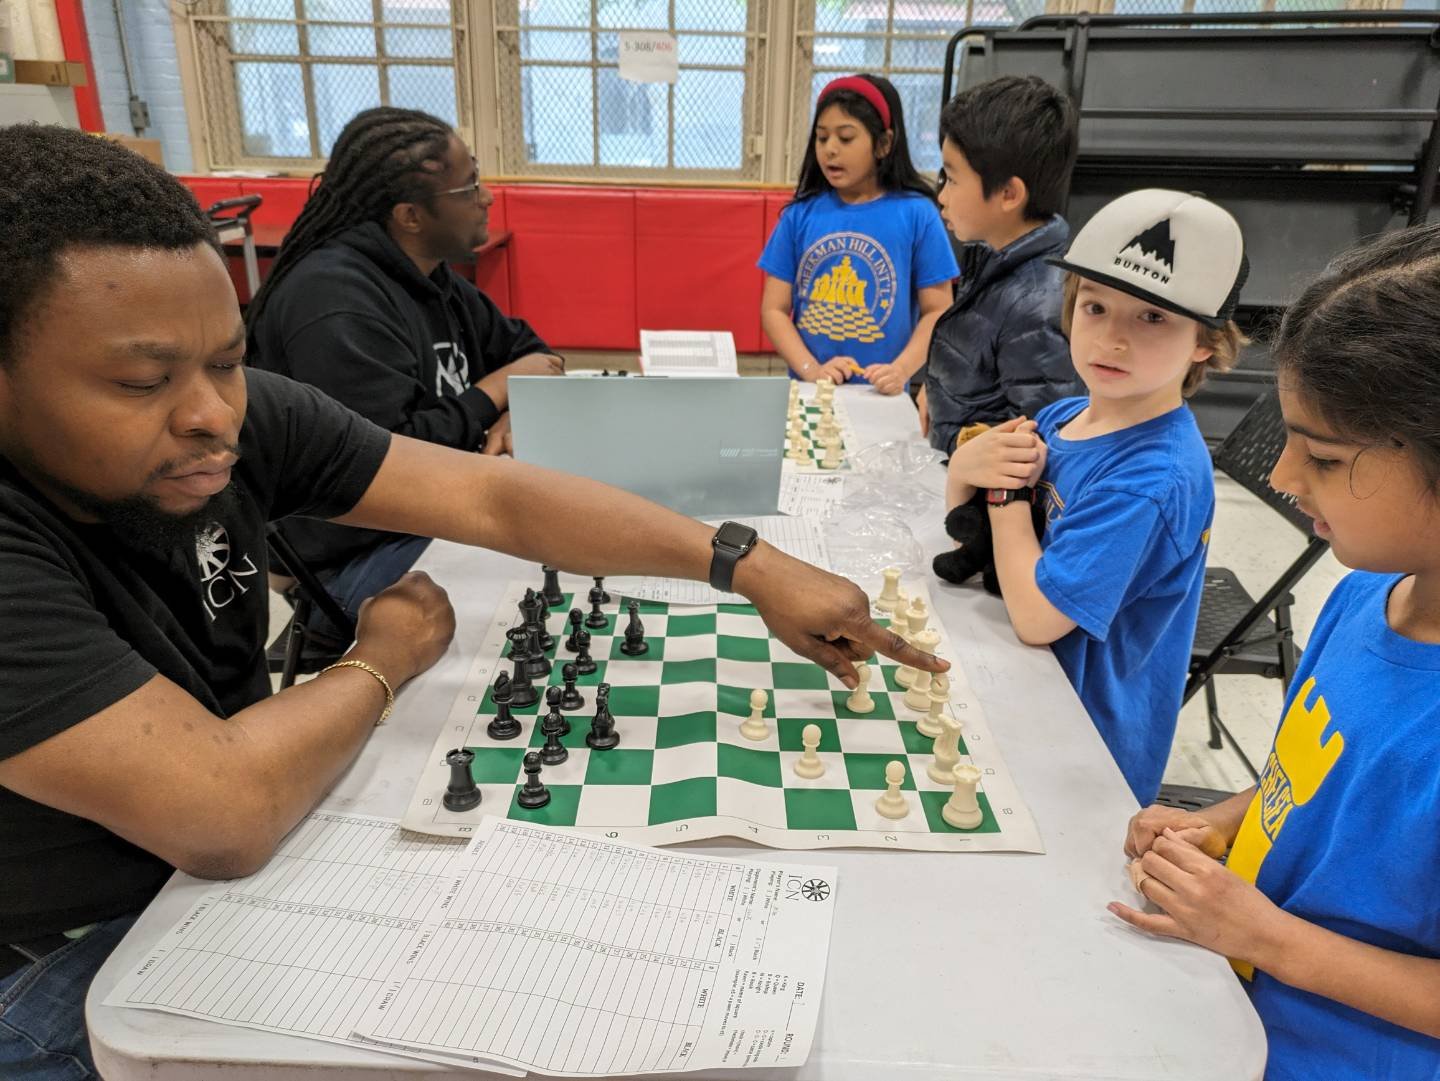 Coaching Game Review stations

#nyc #chess